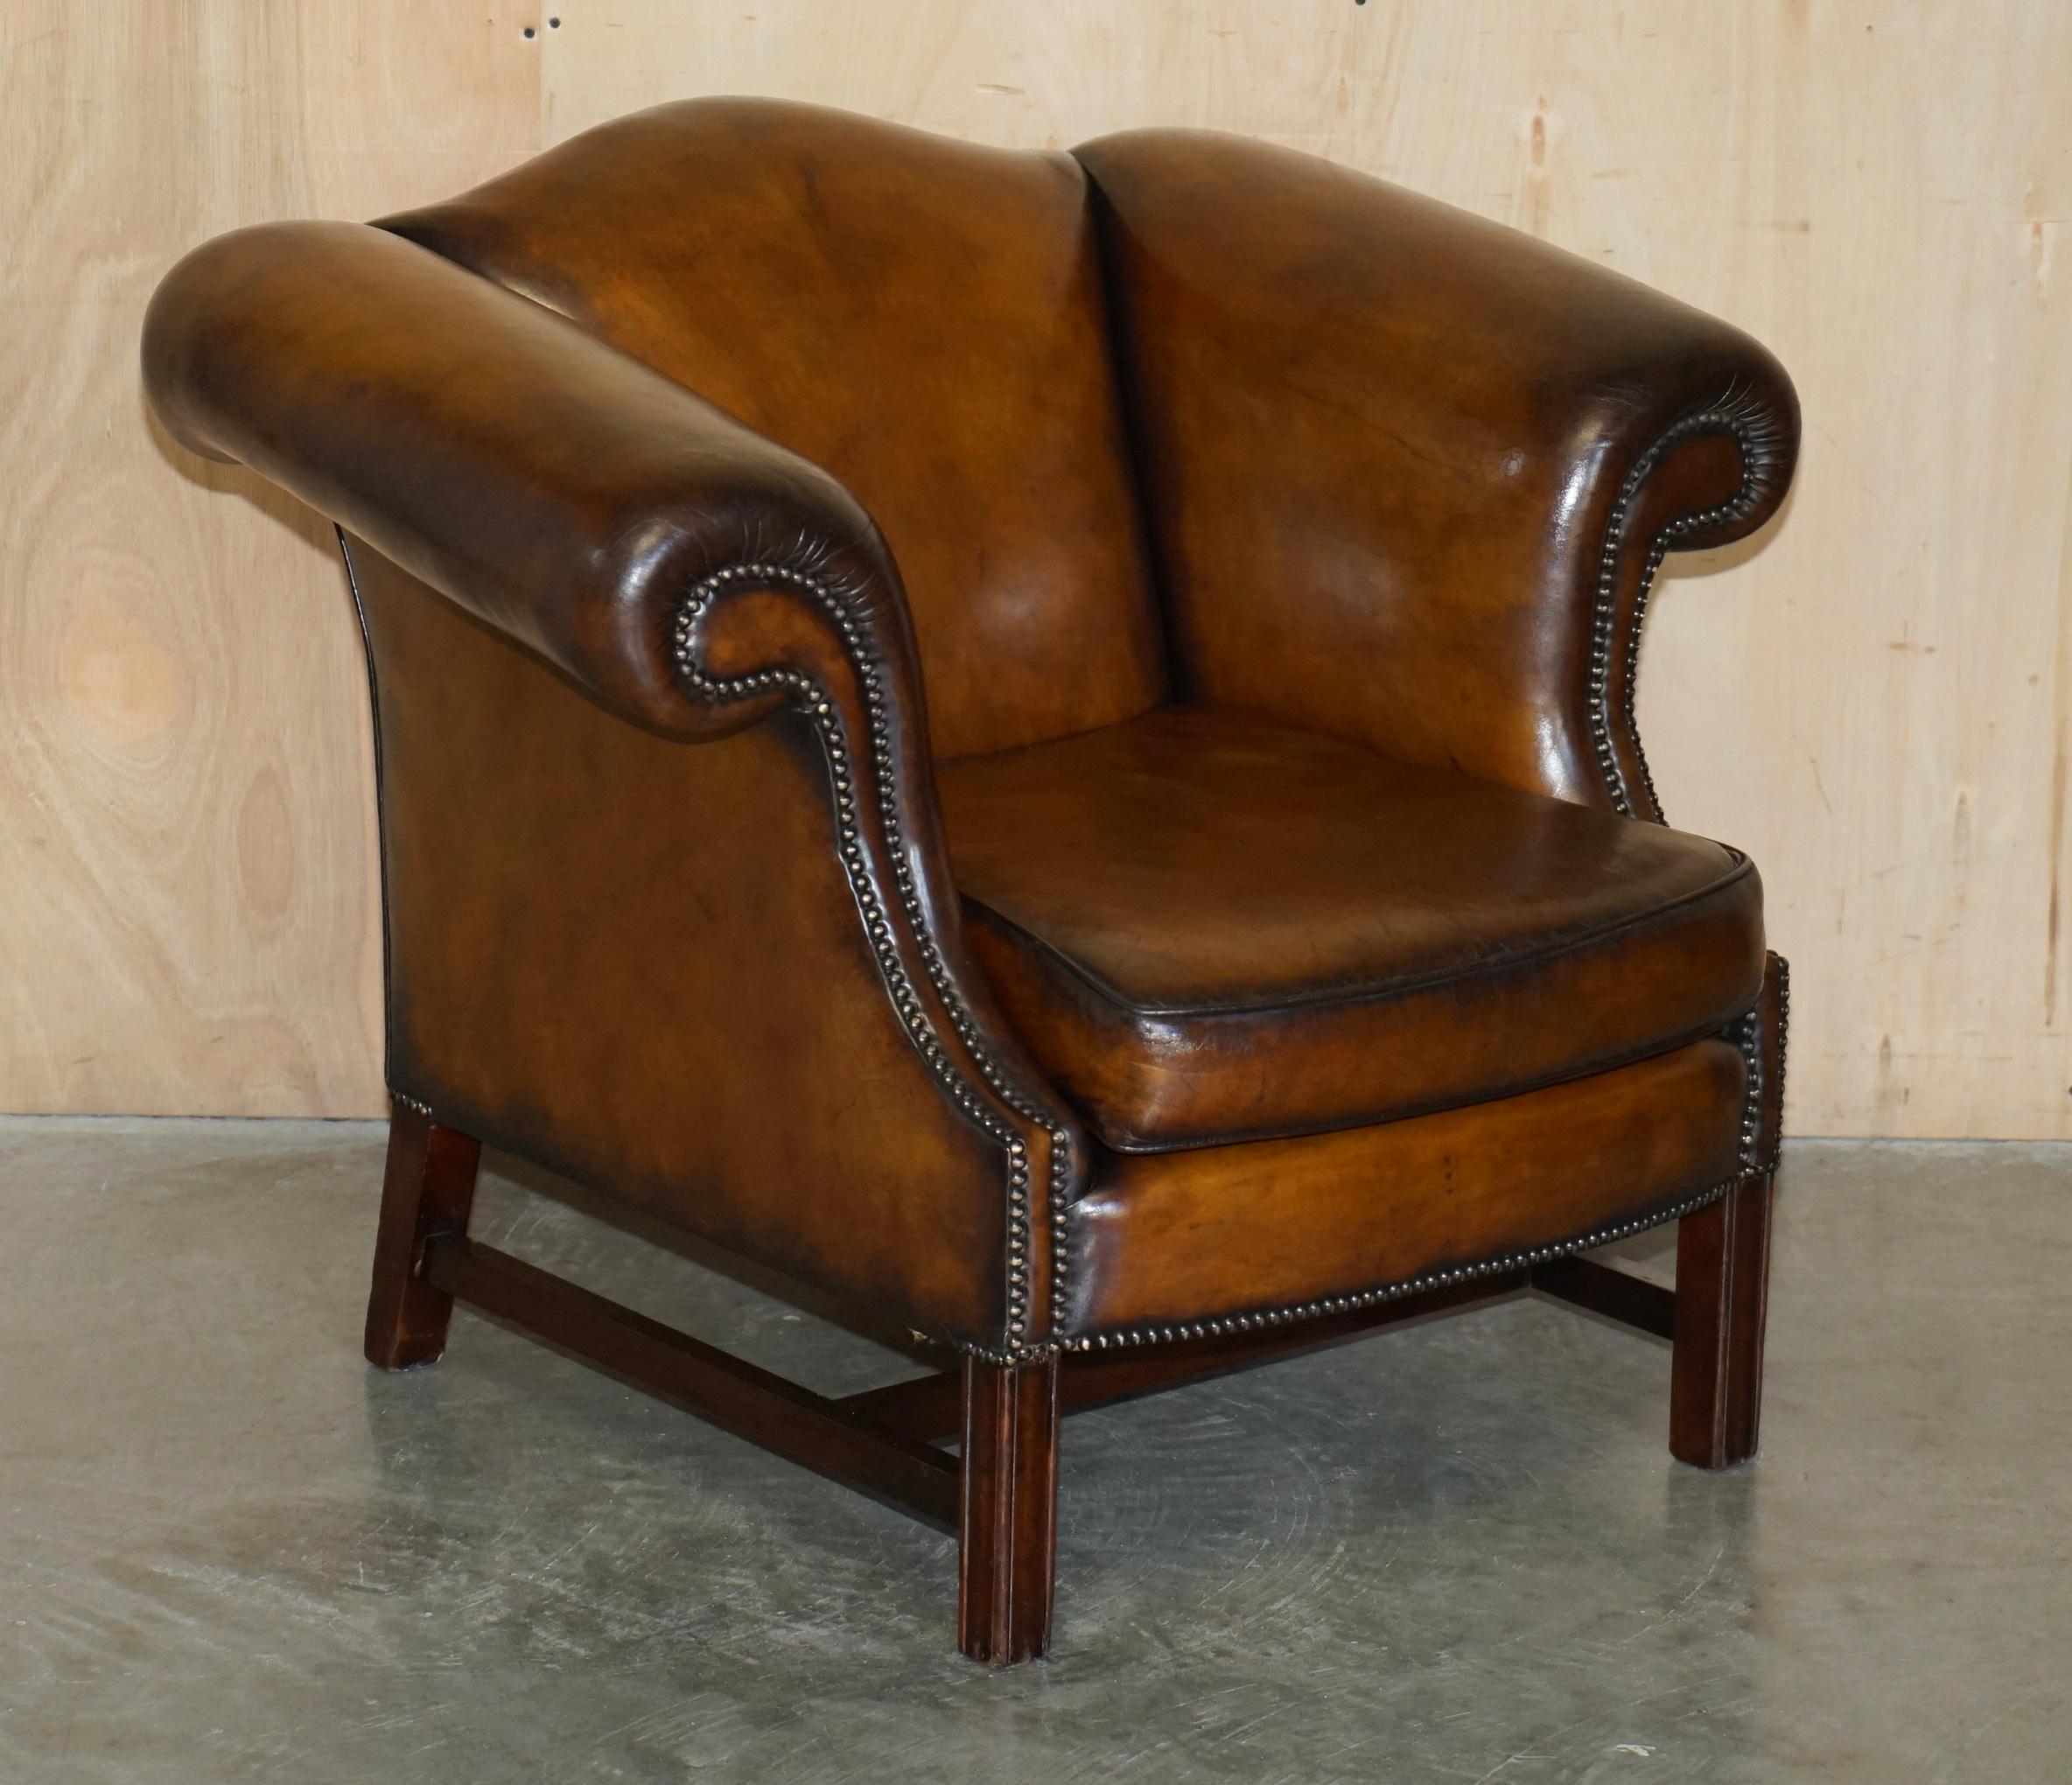 FINE ANTiQUE REGENCY HUMPBACK STYLE RESTORED BROWN LEATHER SOFA ARMCHAIR SUITE For Sale 5